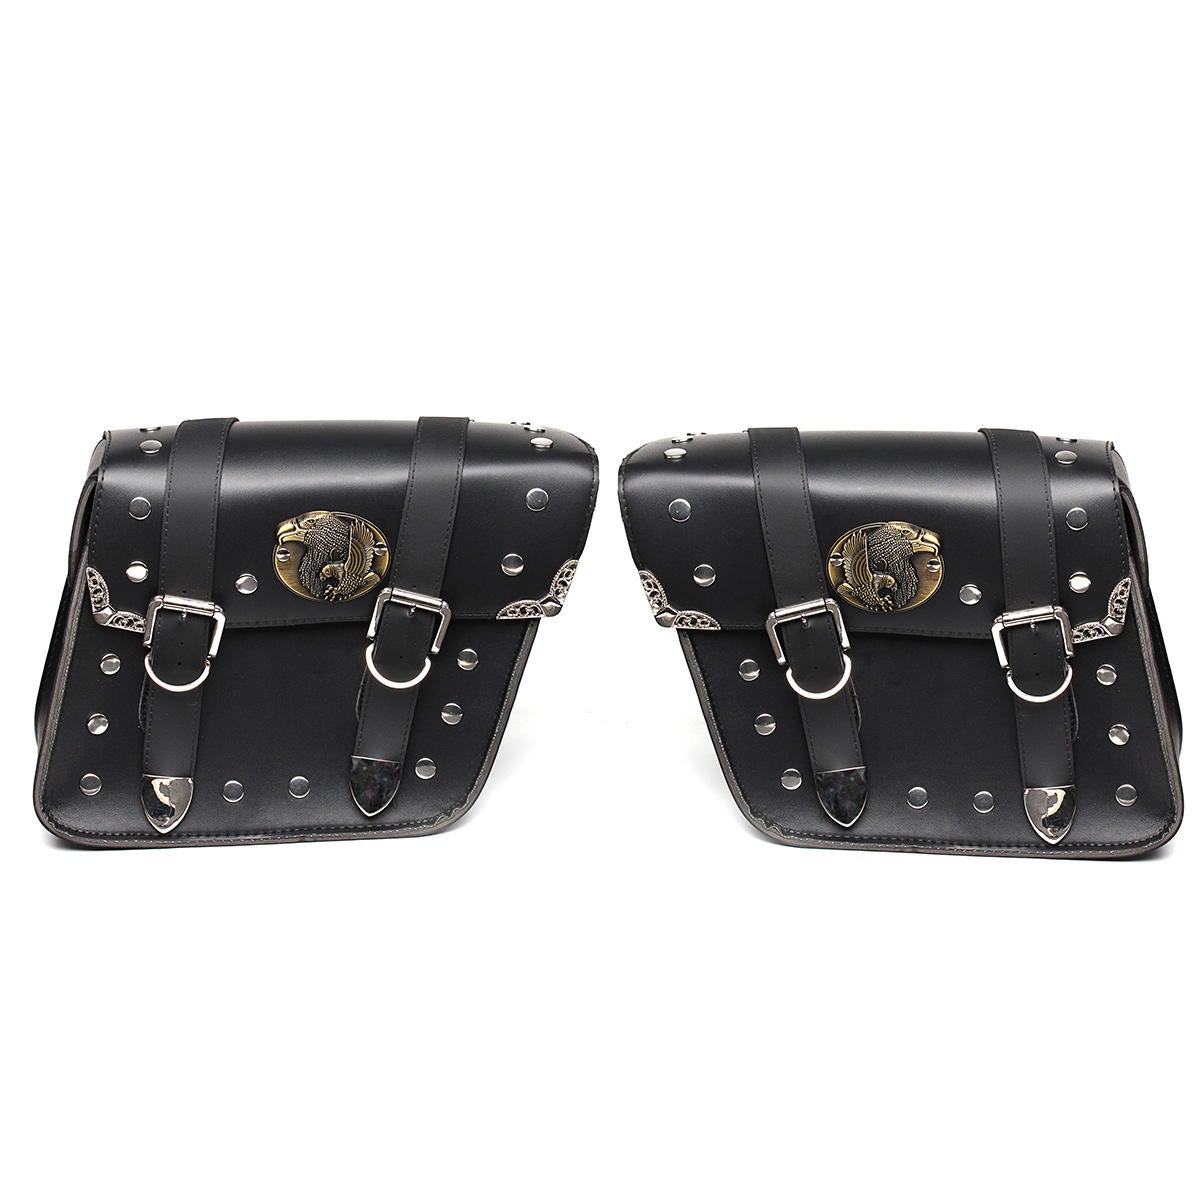 Motorcycle Saddlebags Side Bag Tool Bags Left Right Pouch For Harley Chopper Black